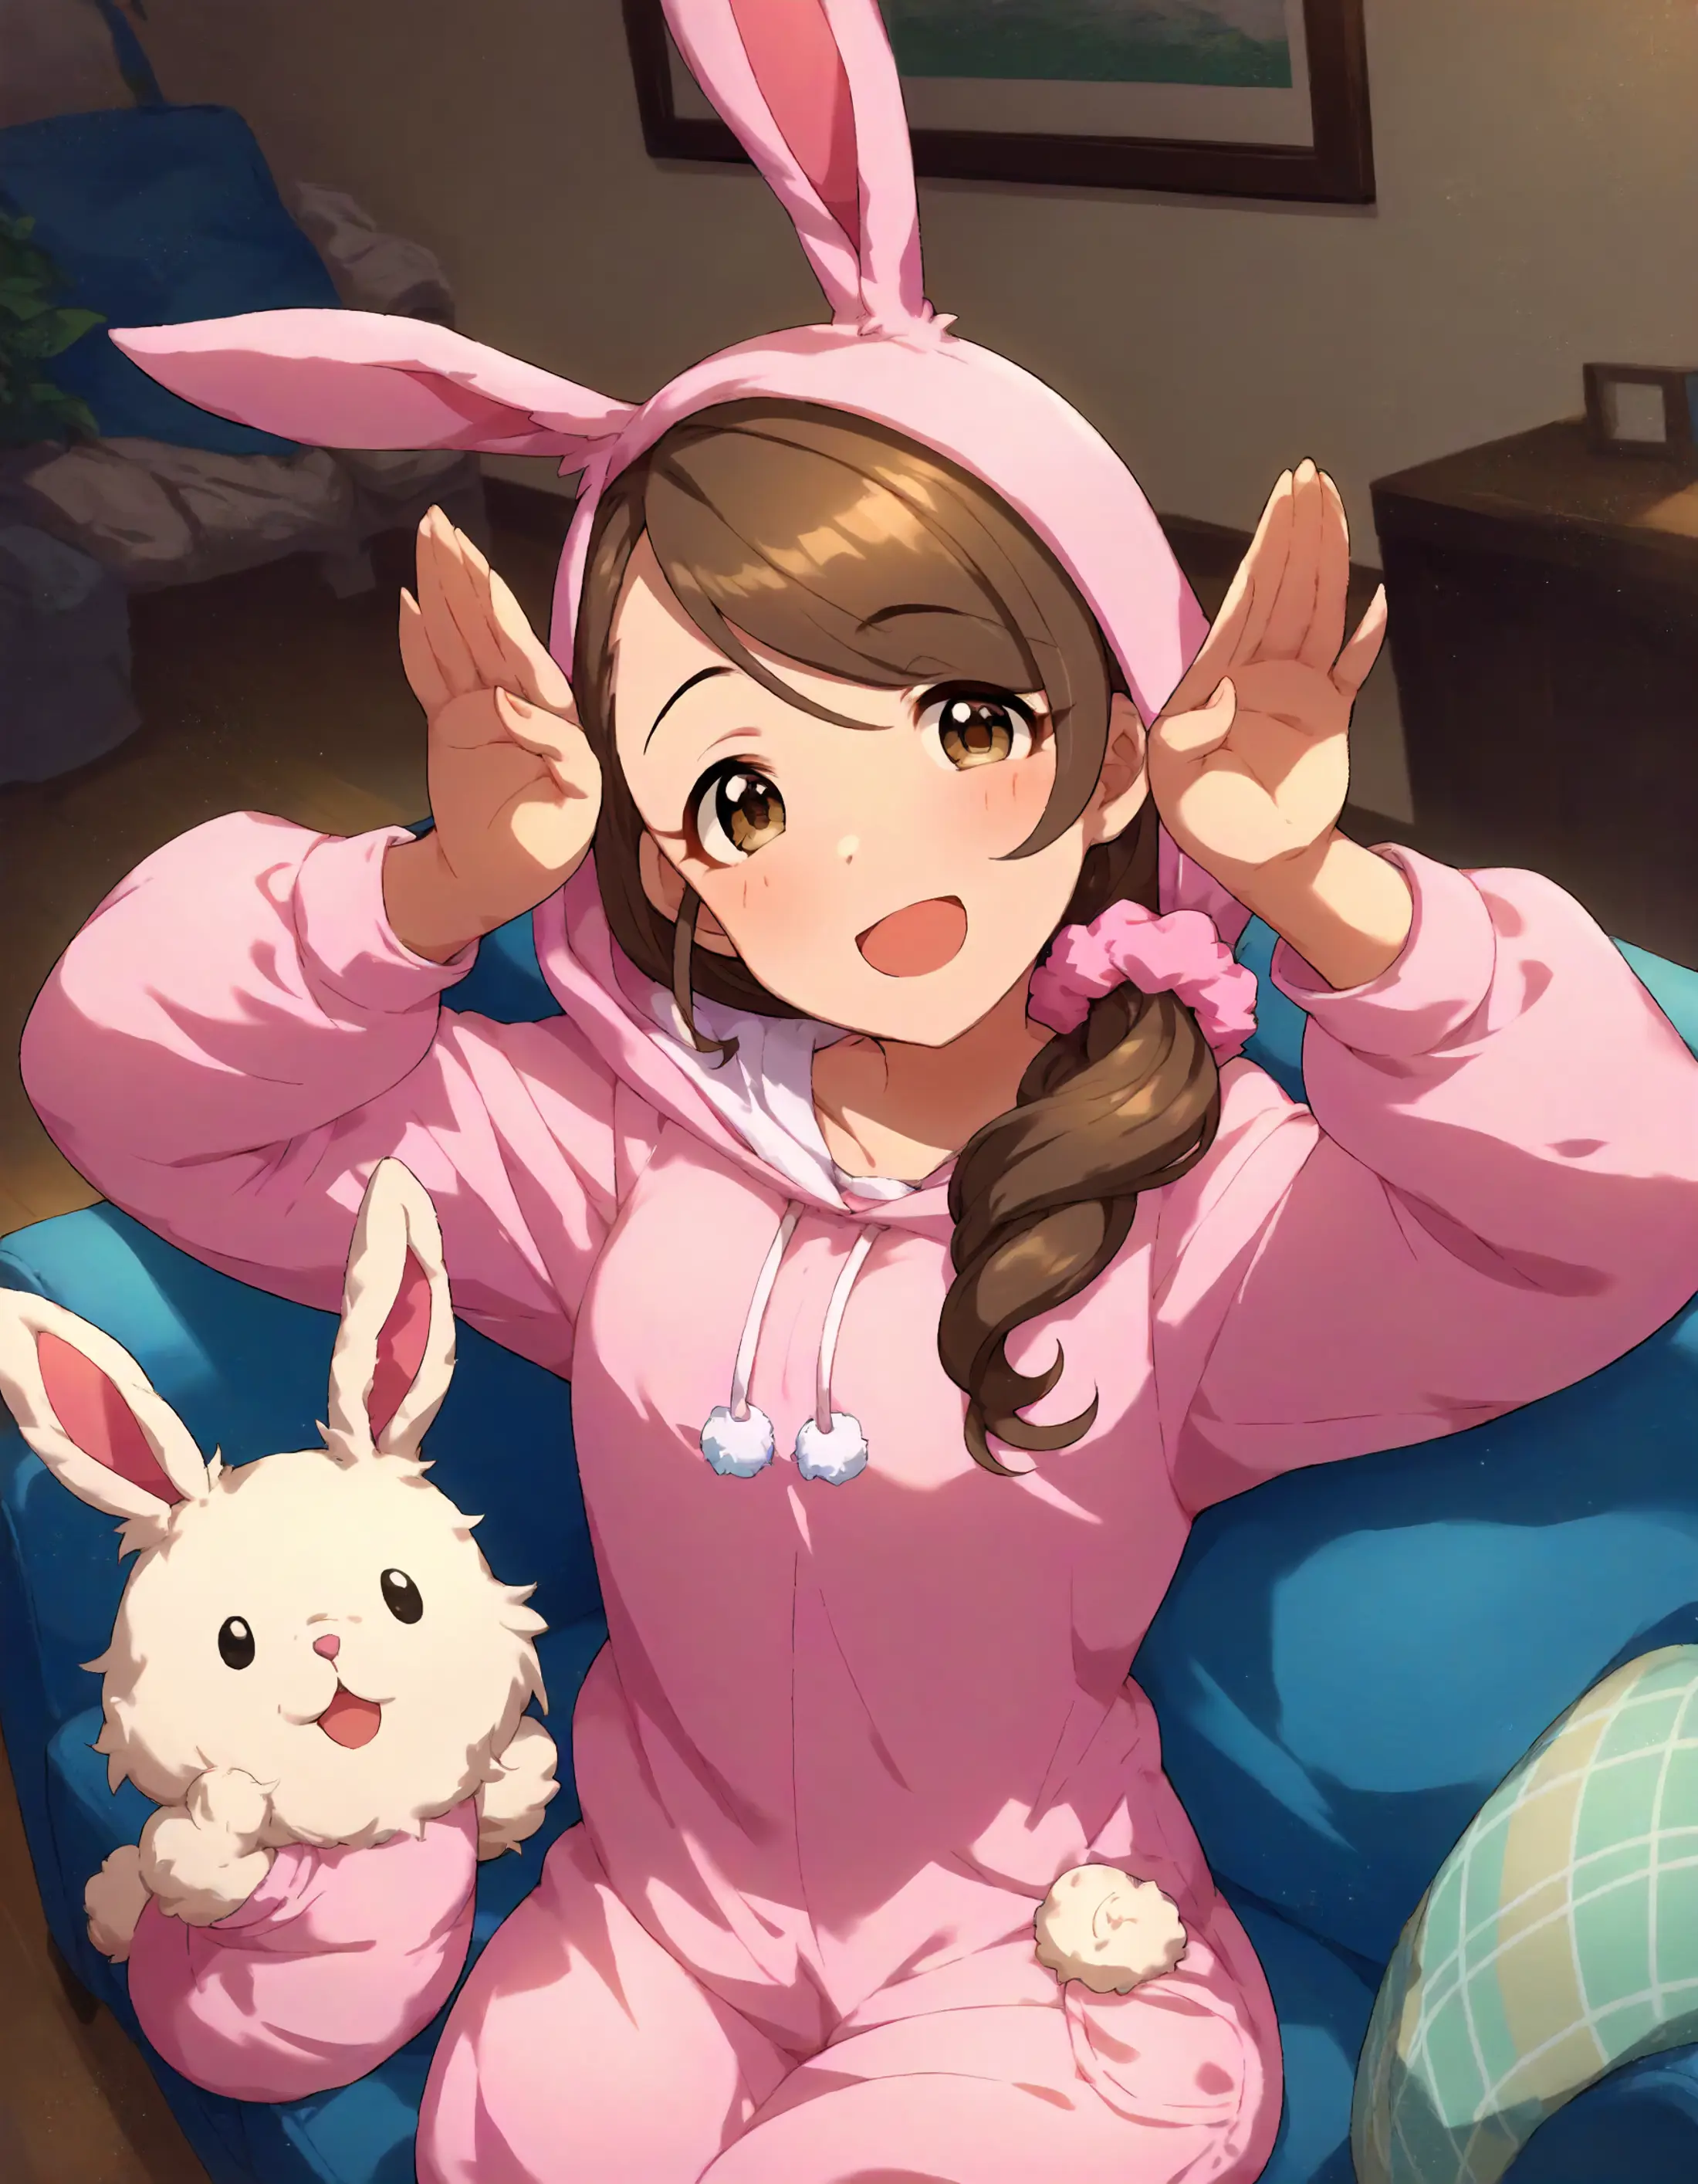 A cheerful young woman wearing a pink bunny onesie, sitting on a blue seat. The onesie features long ears, and she is making bunny ears with both hands near their face. A plush bunny toy sits beside her, mirroring her pose. 